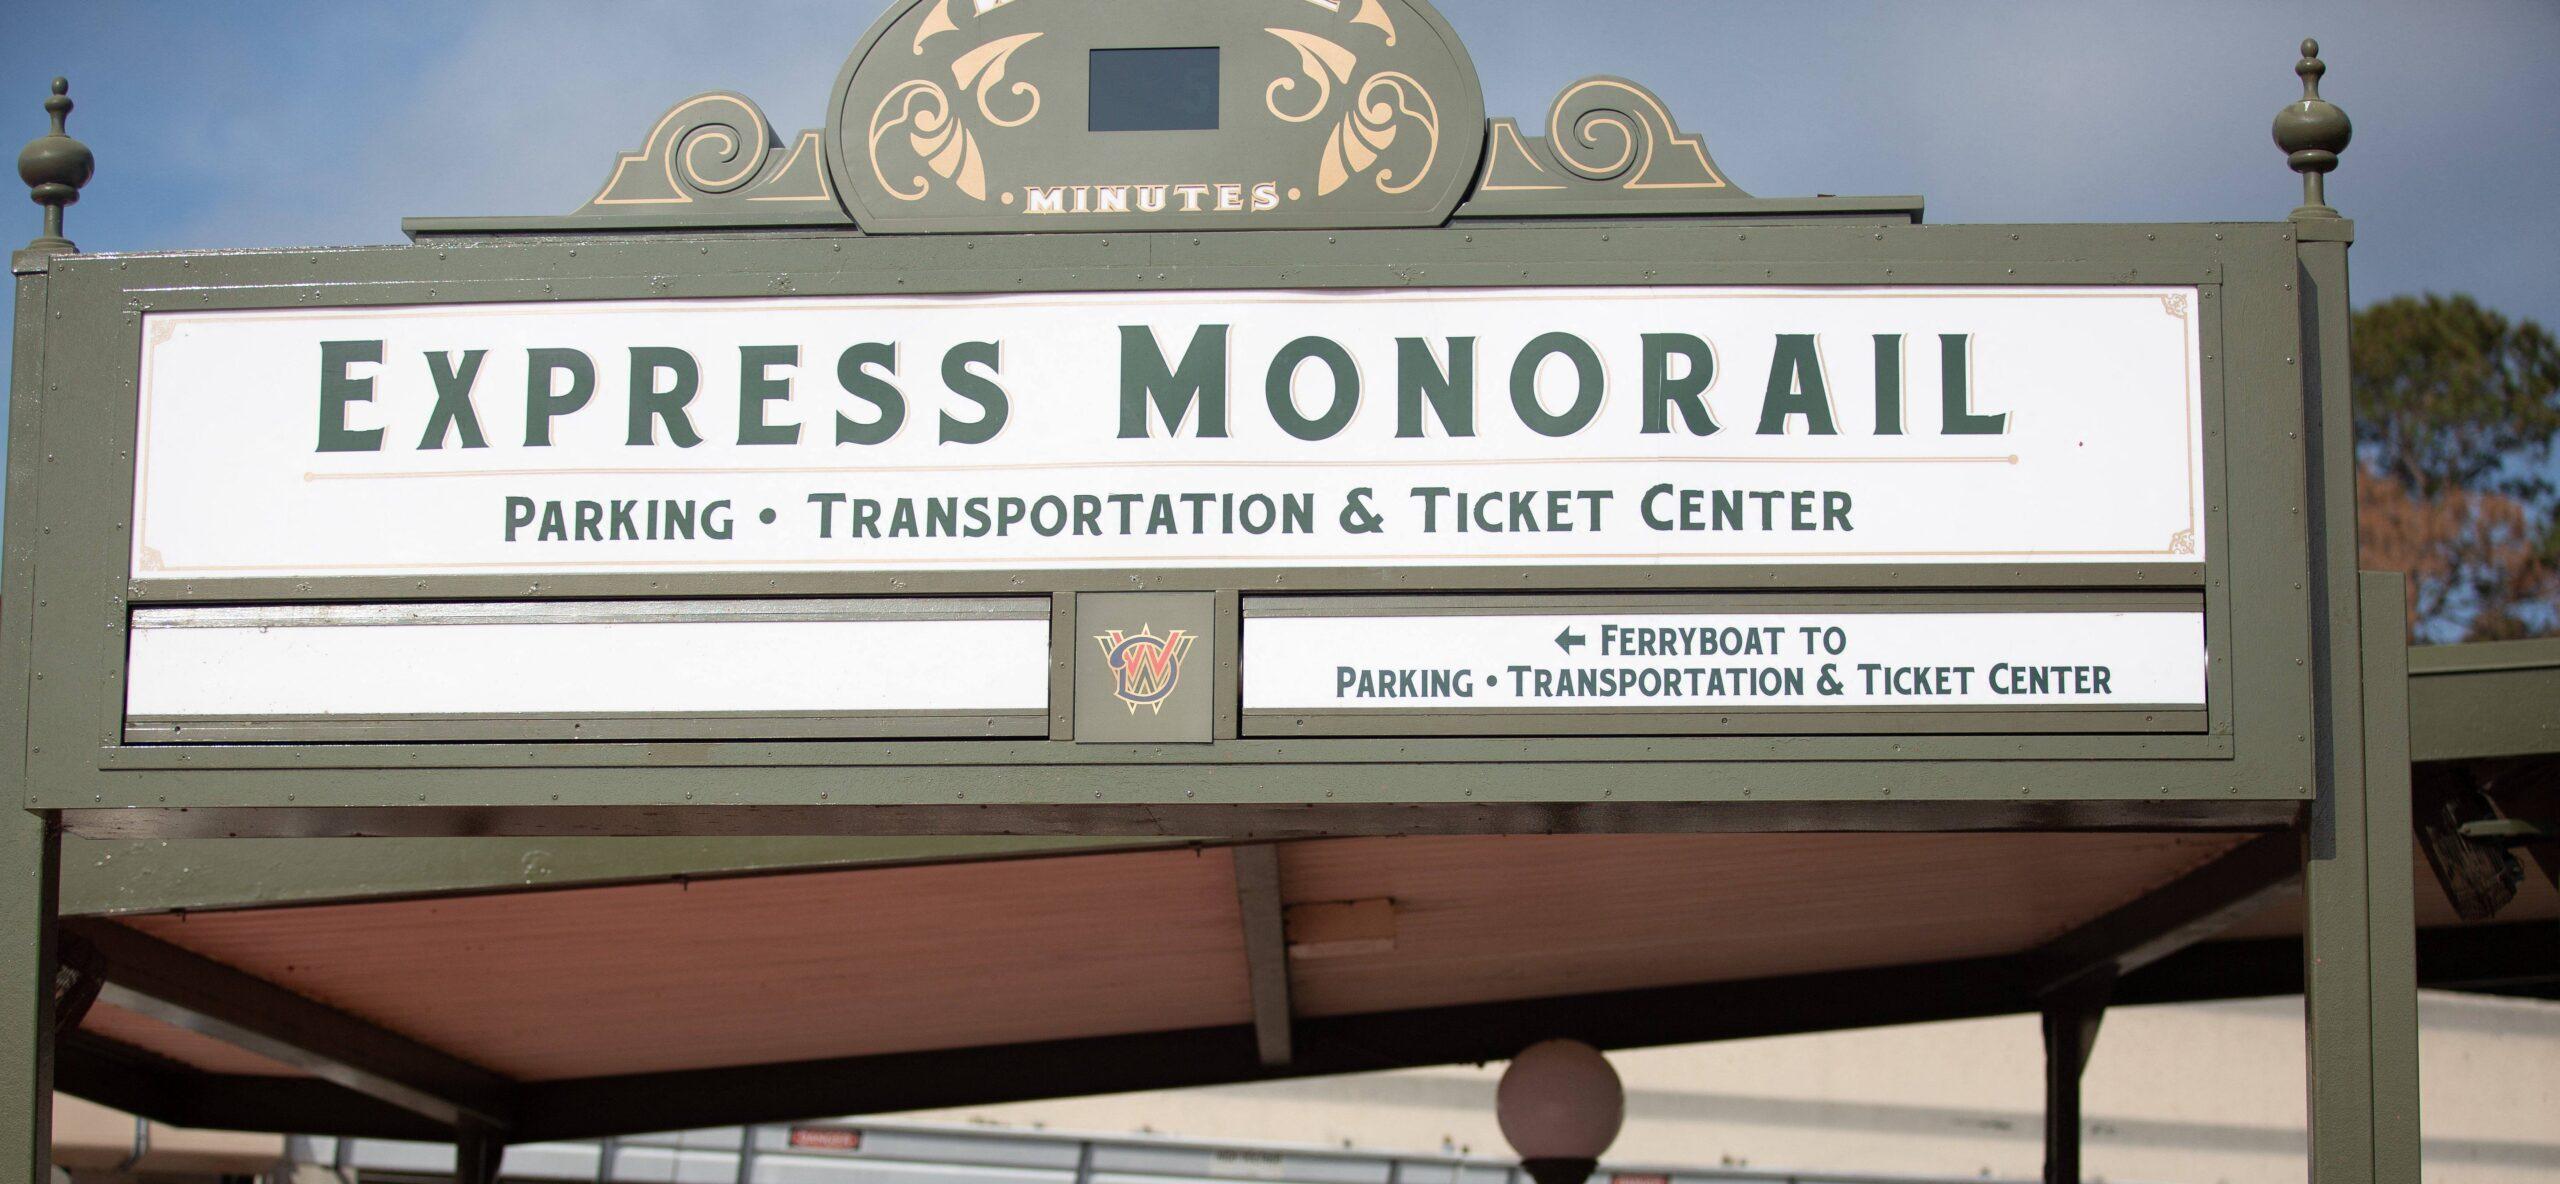 Woman Files Lawsuit Against Disney After Being Stuck In Monorail